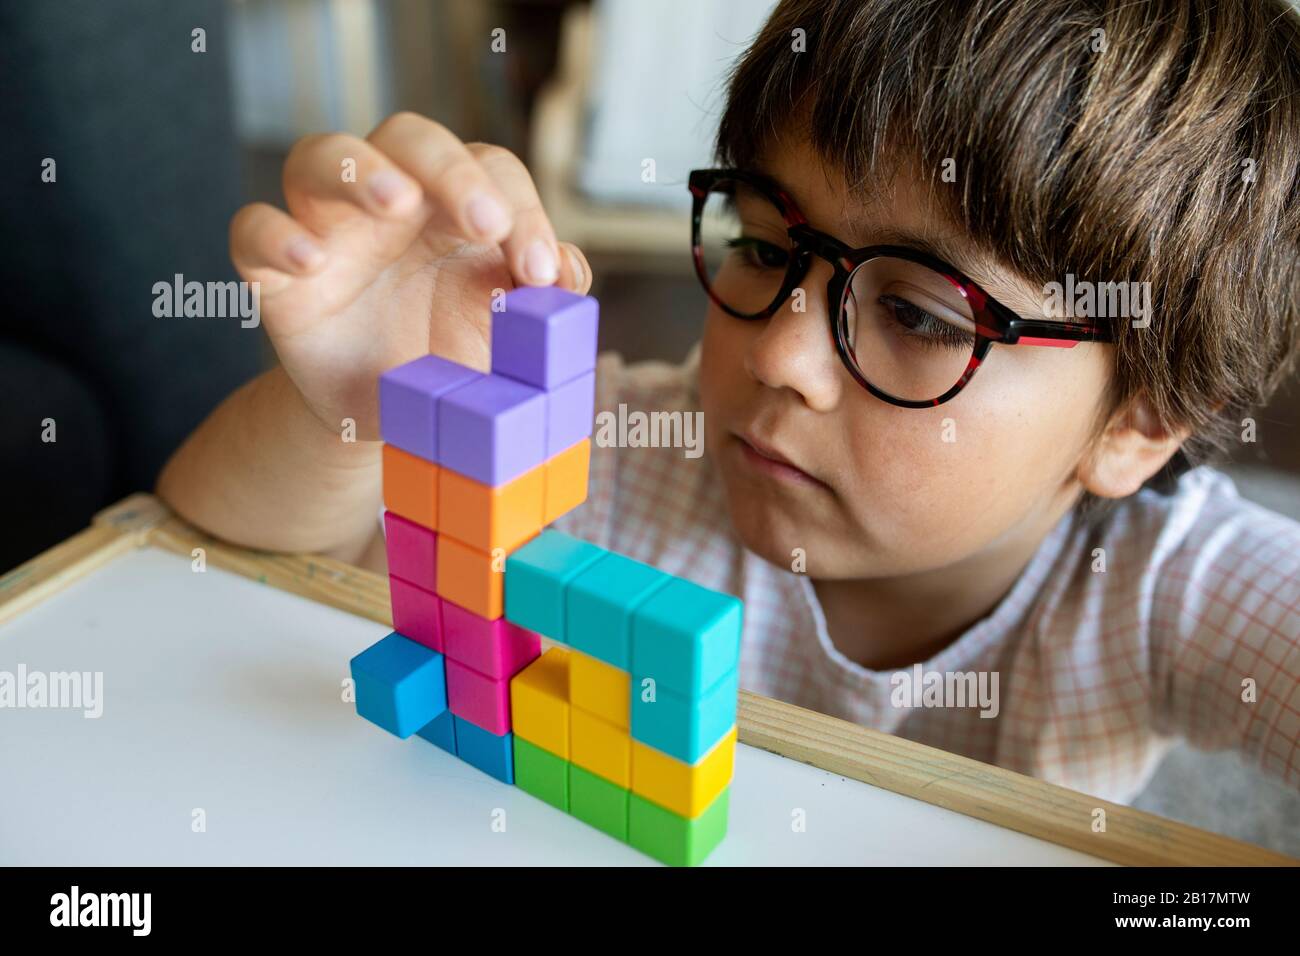 Portrait of little boy with glasses playing with building blocks Stock Photo